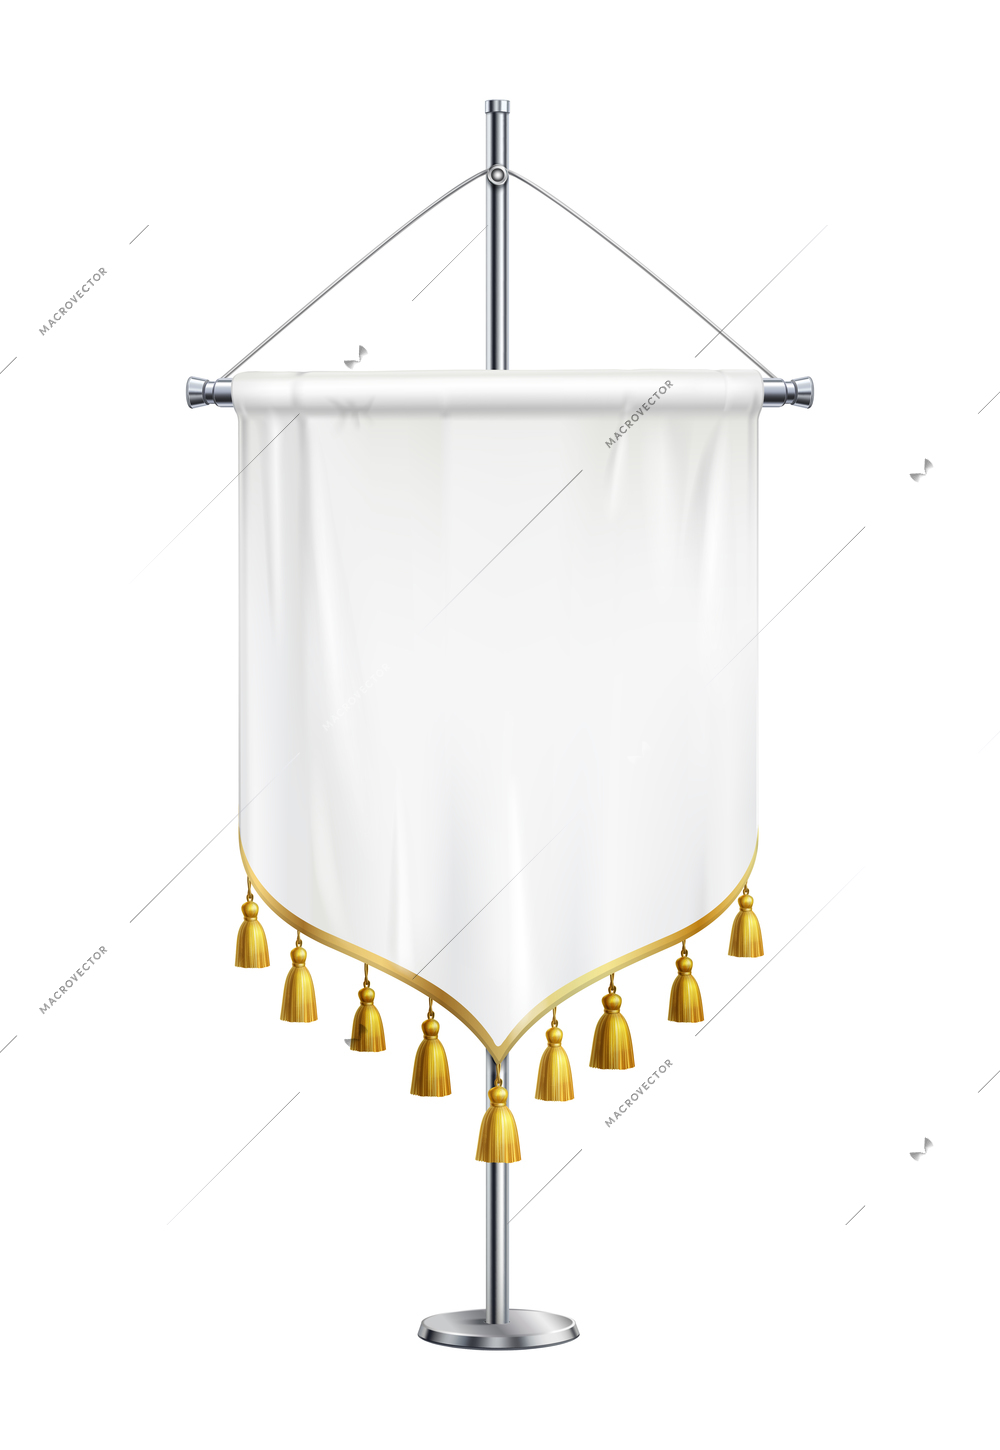 Realistic blank white satin pennant with golden tassels on metal pole vector illustration